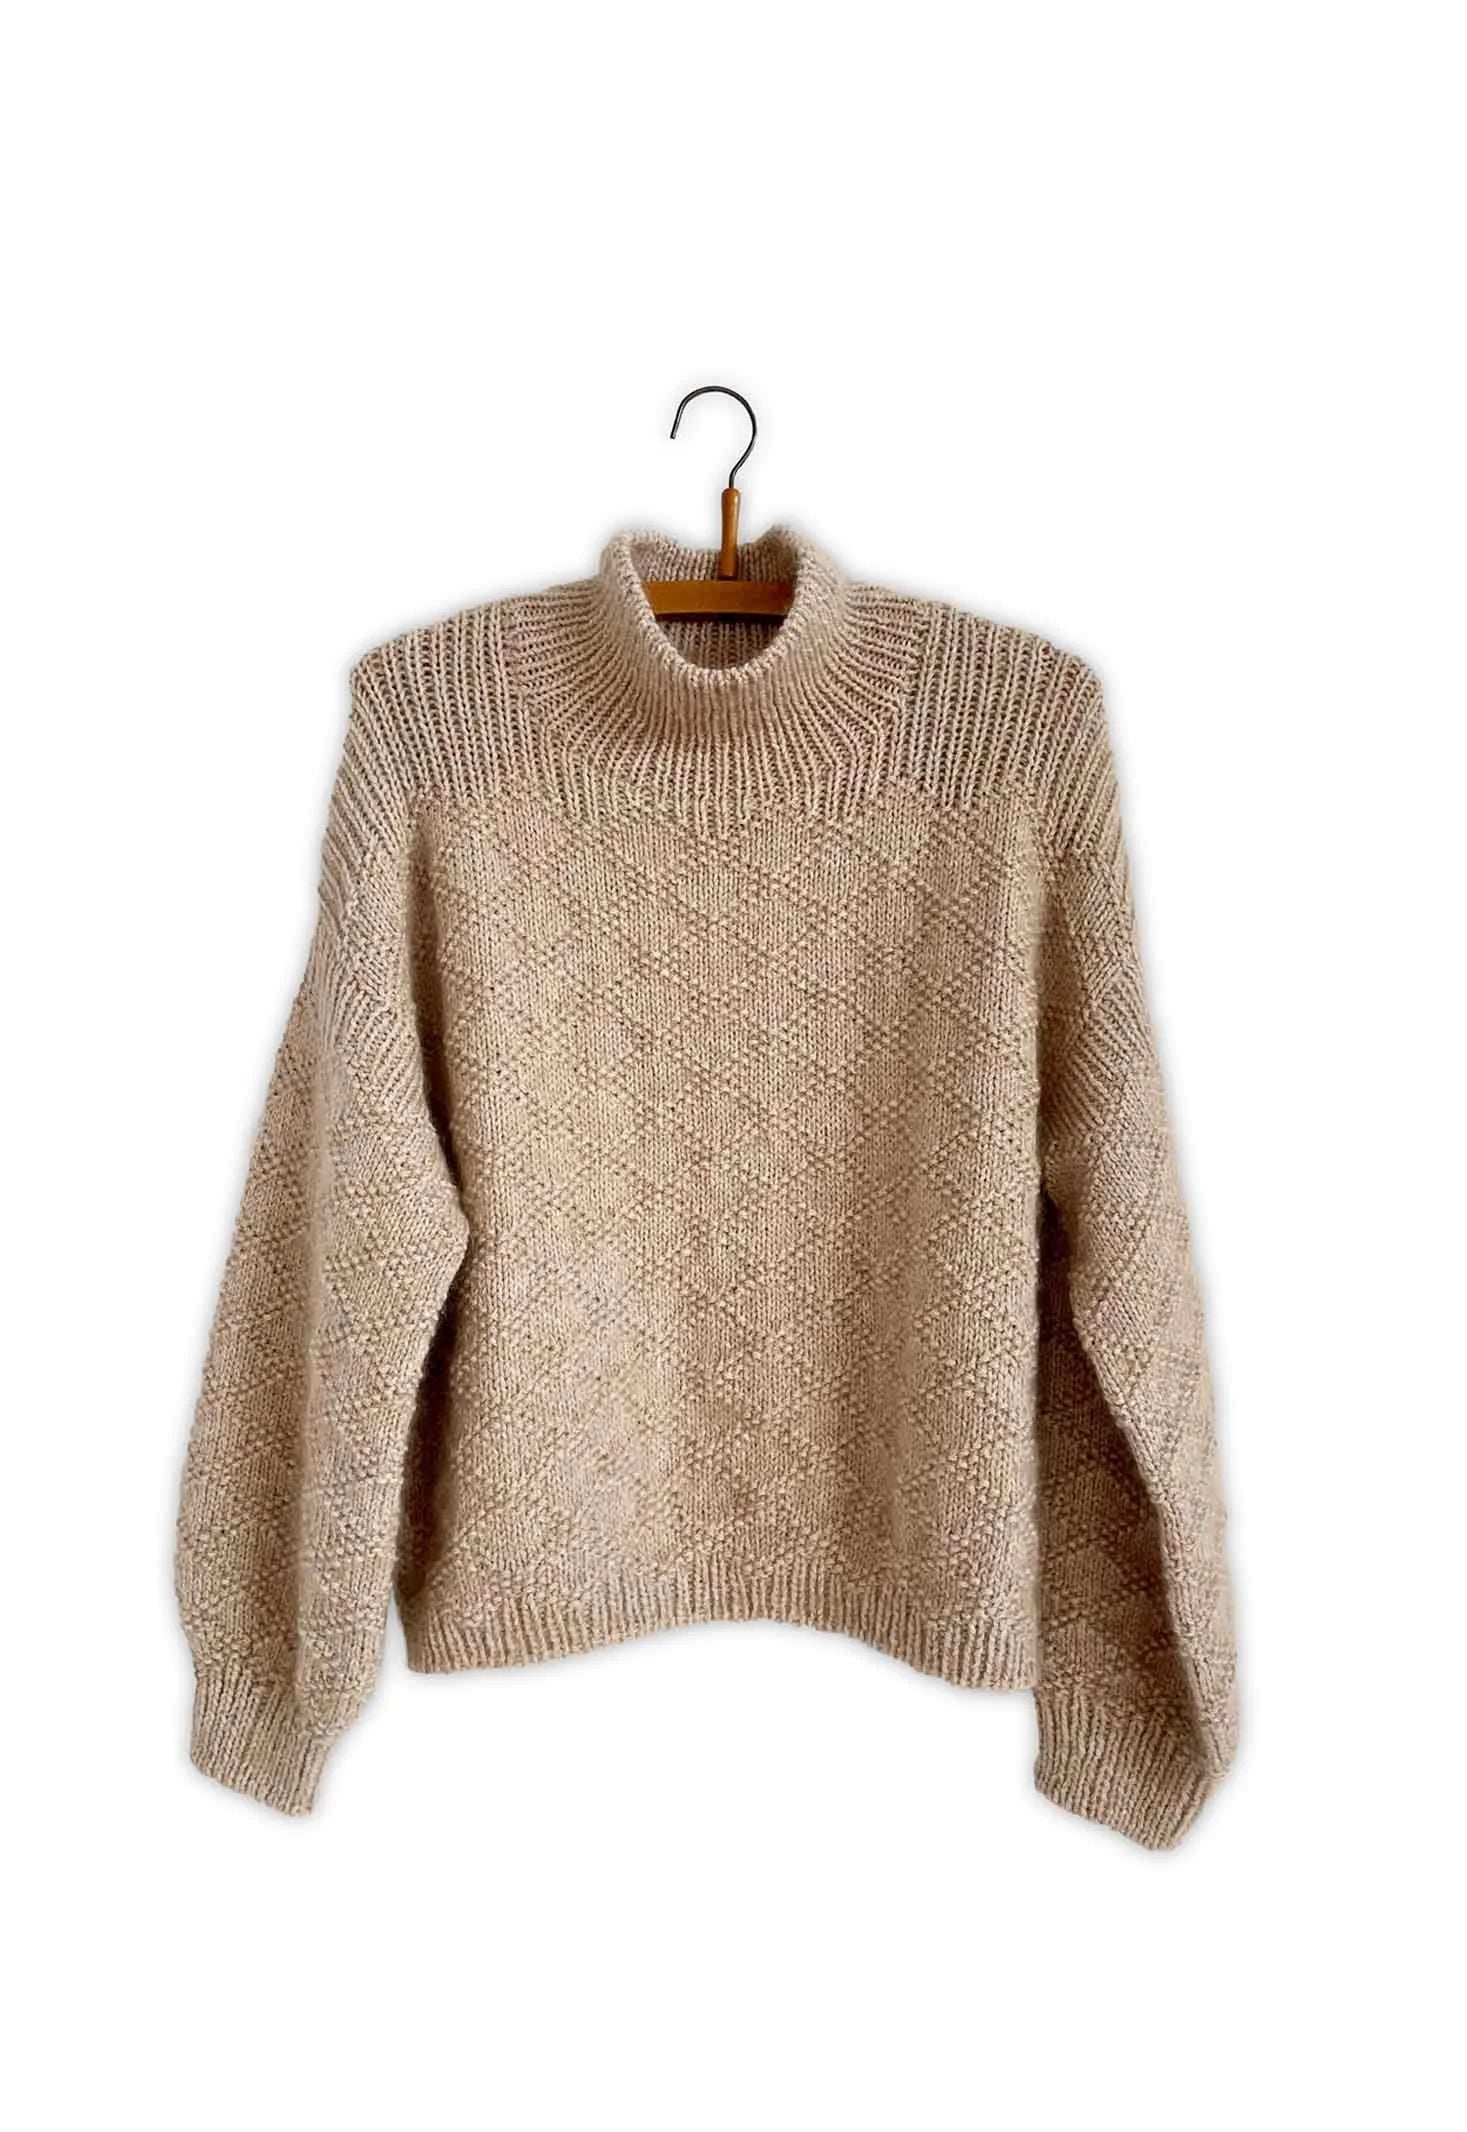 Isager Texture Sweater - Isager - The Little Yarn Store